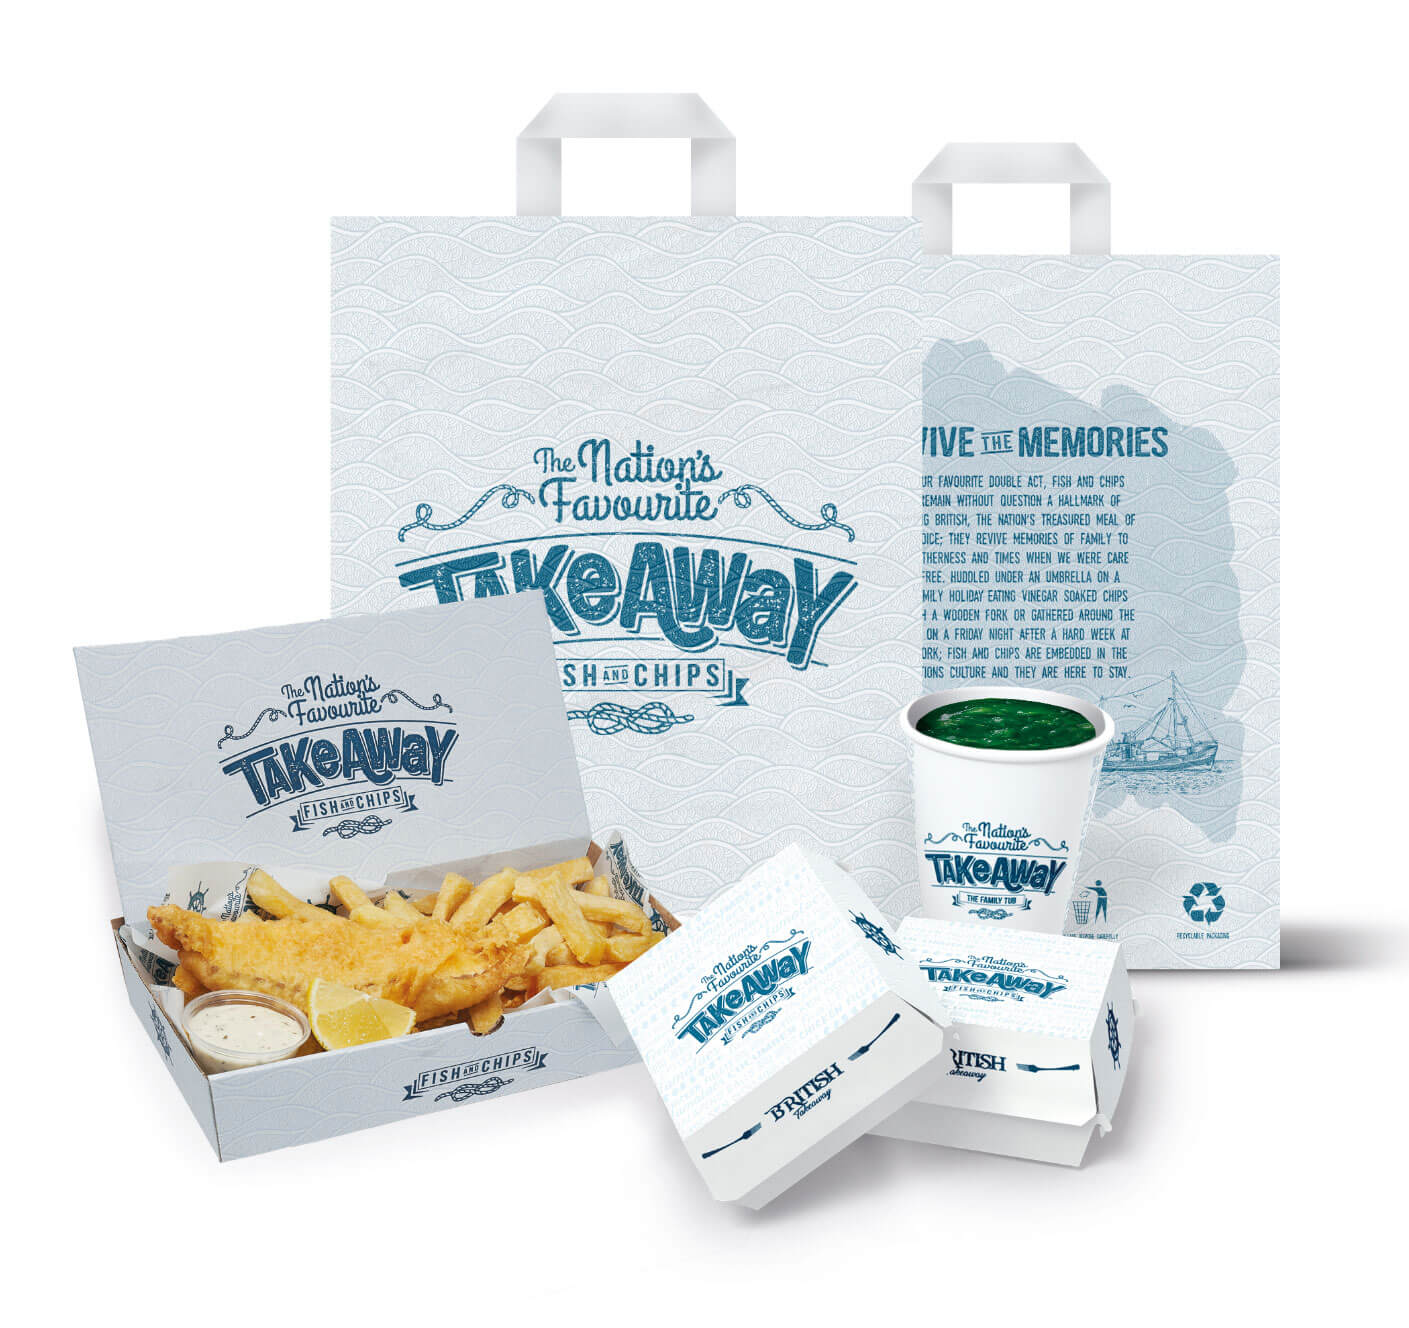 Food packaging, product packaging and product branding for The Nations Favourite